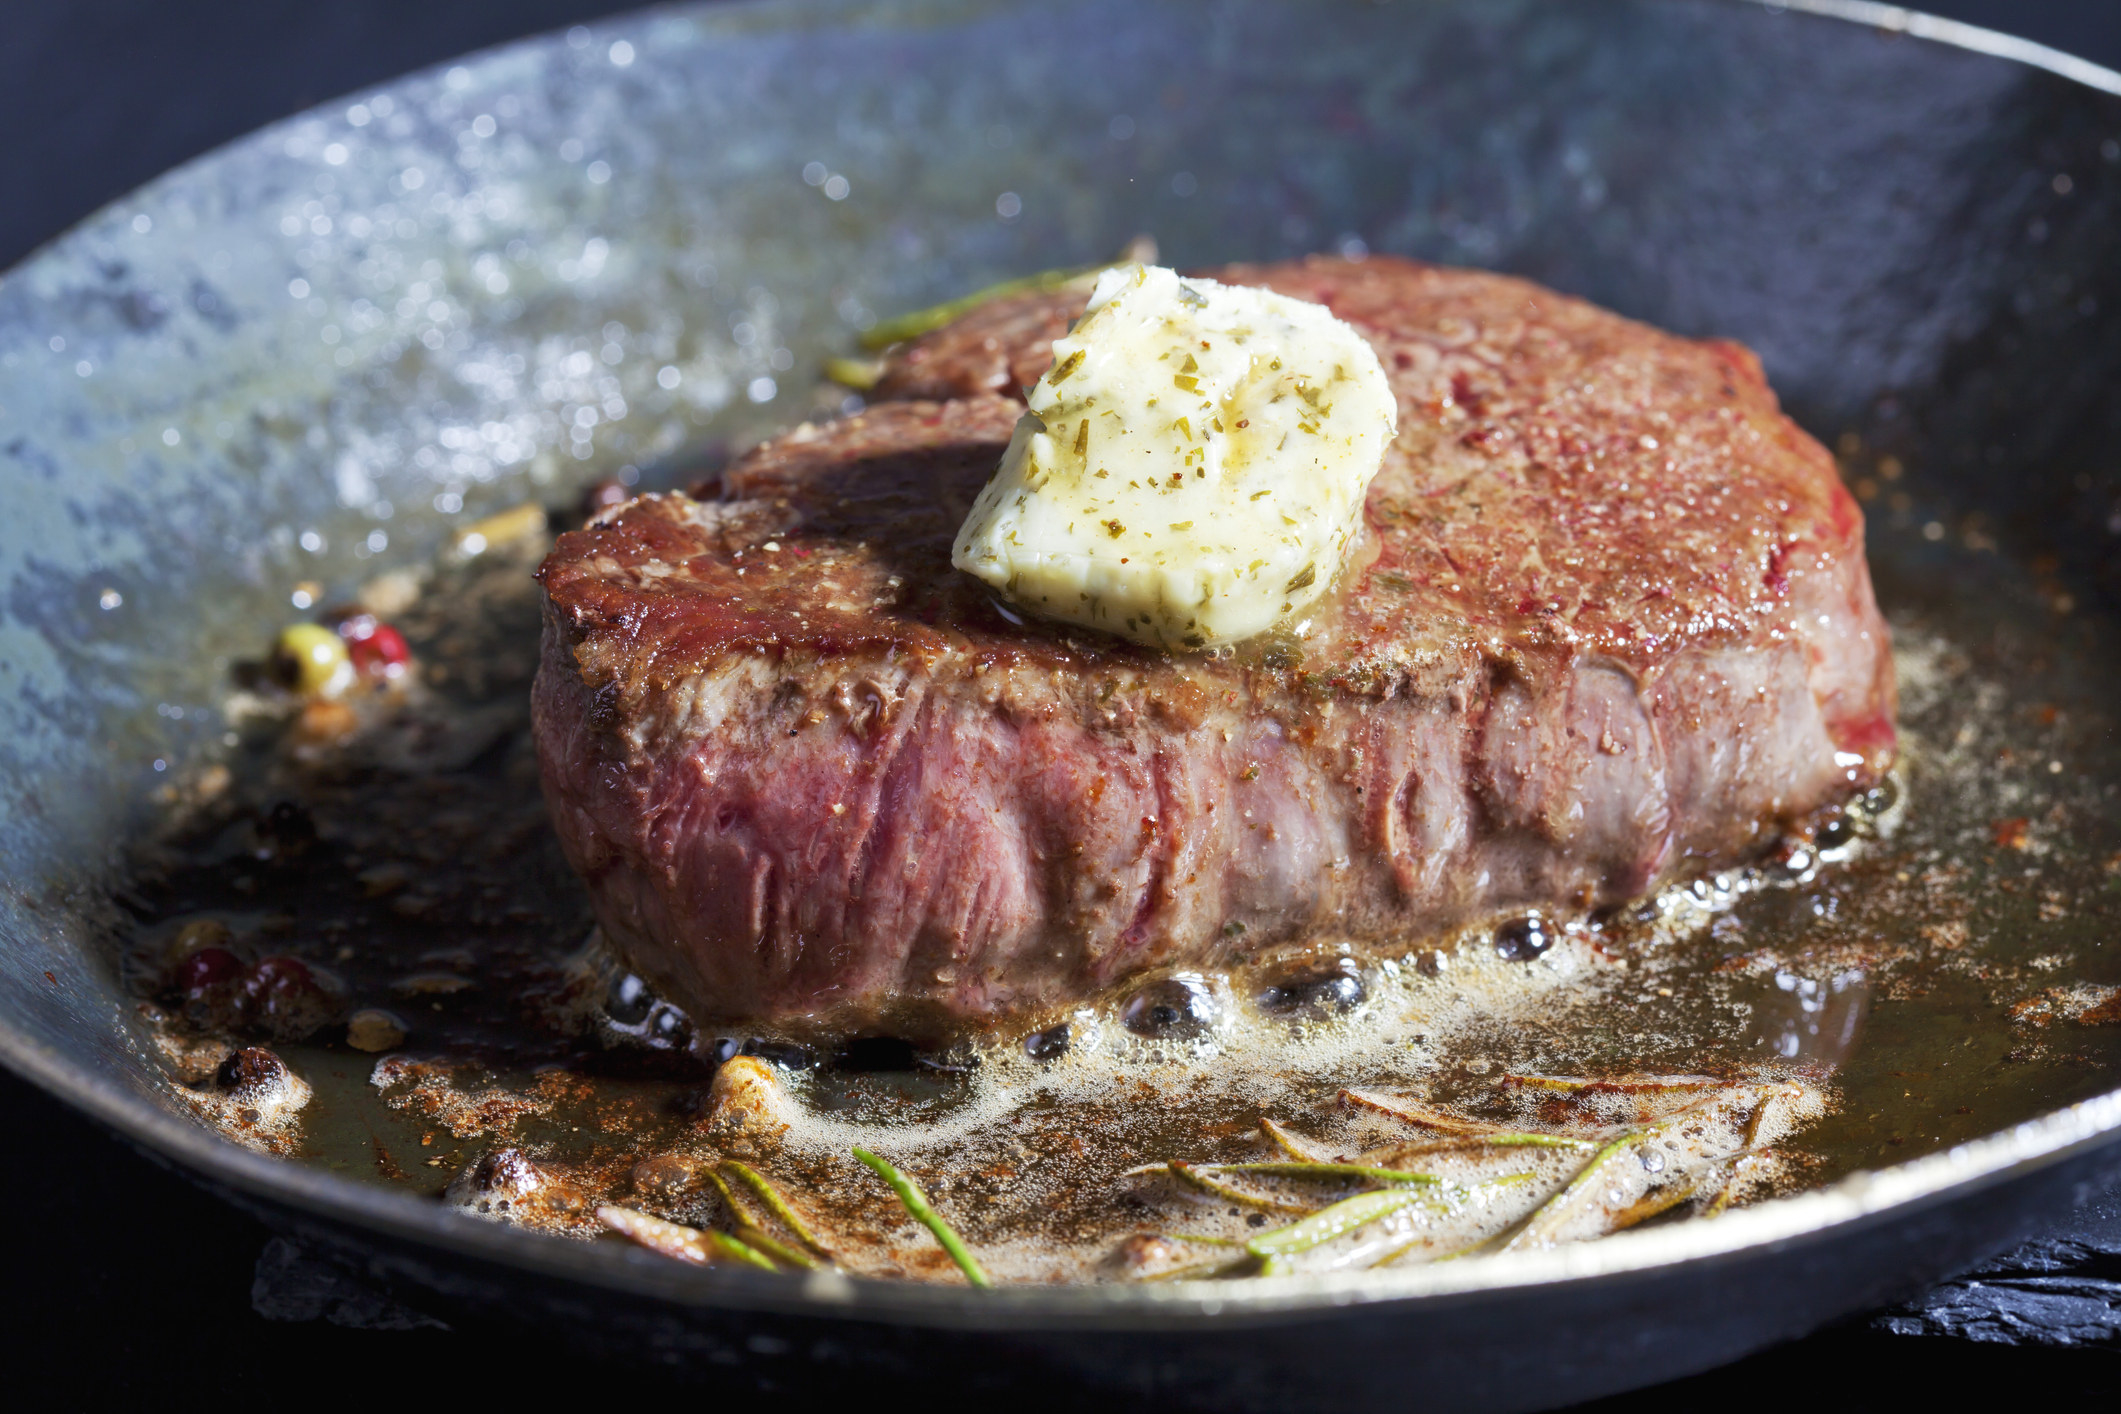 A fillet of beef with herb butter, peppercorns and rosemary in a pan.